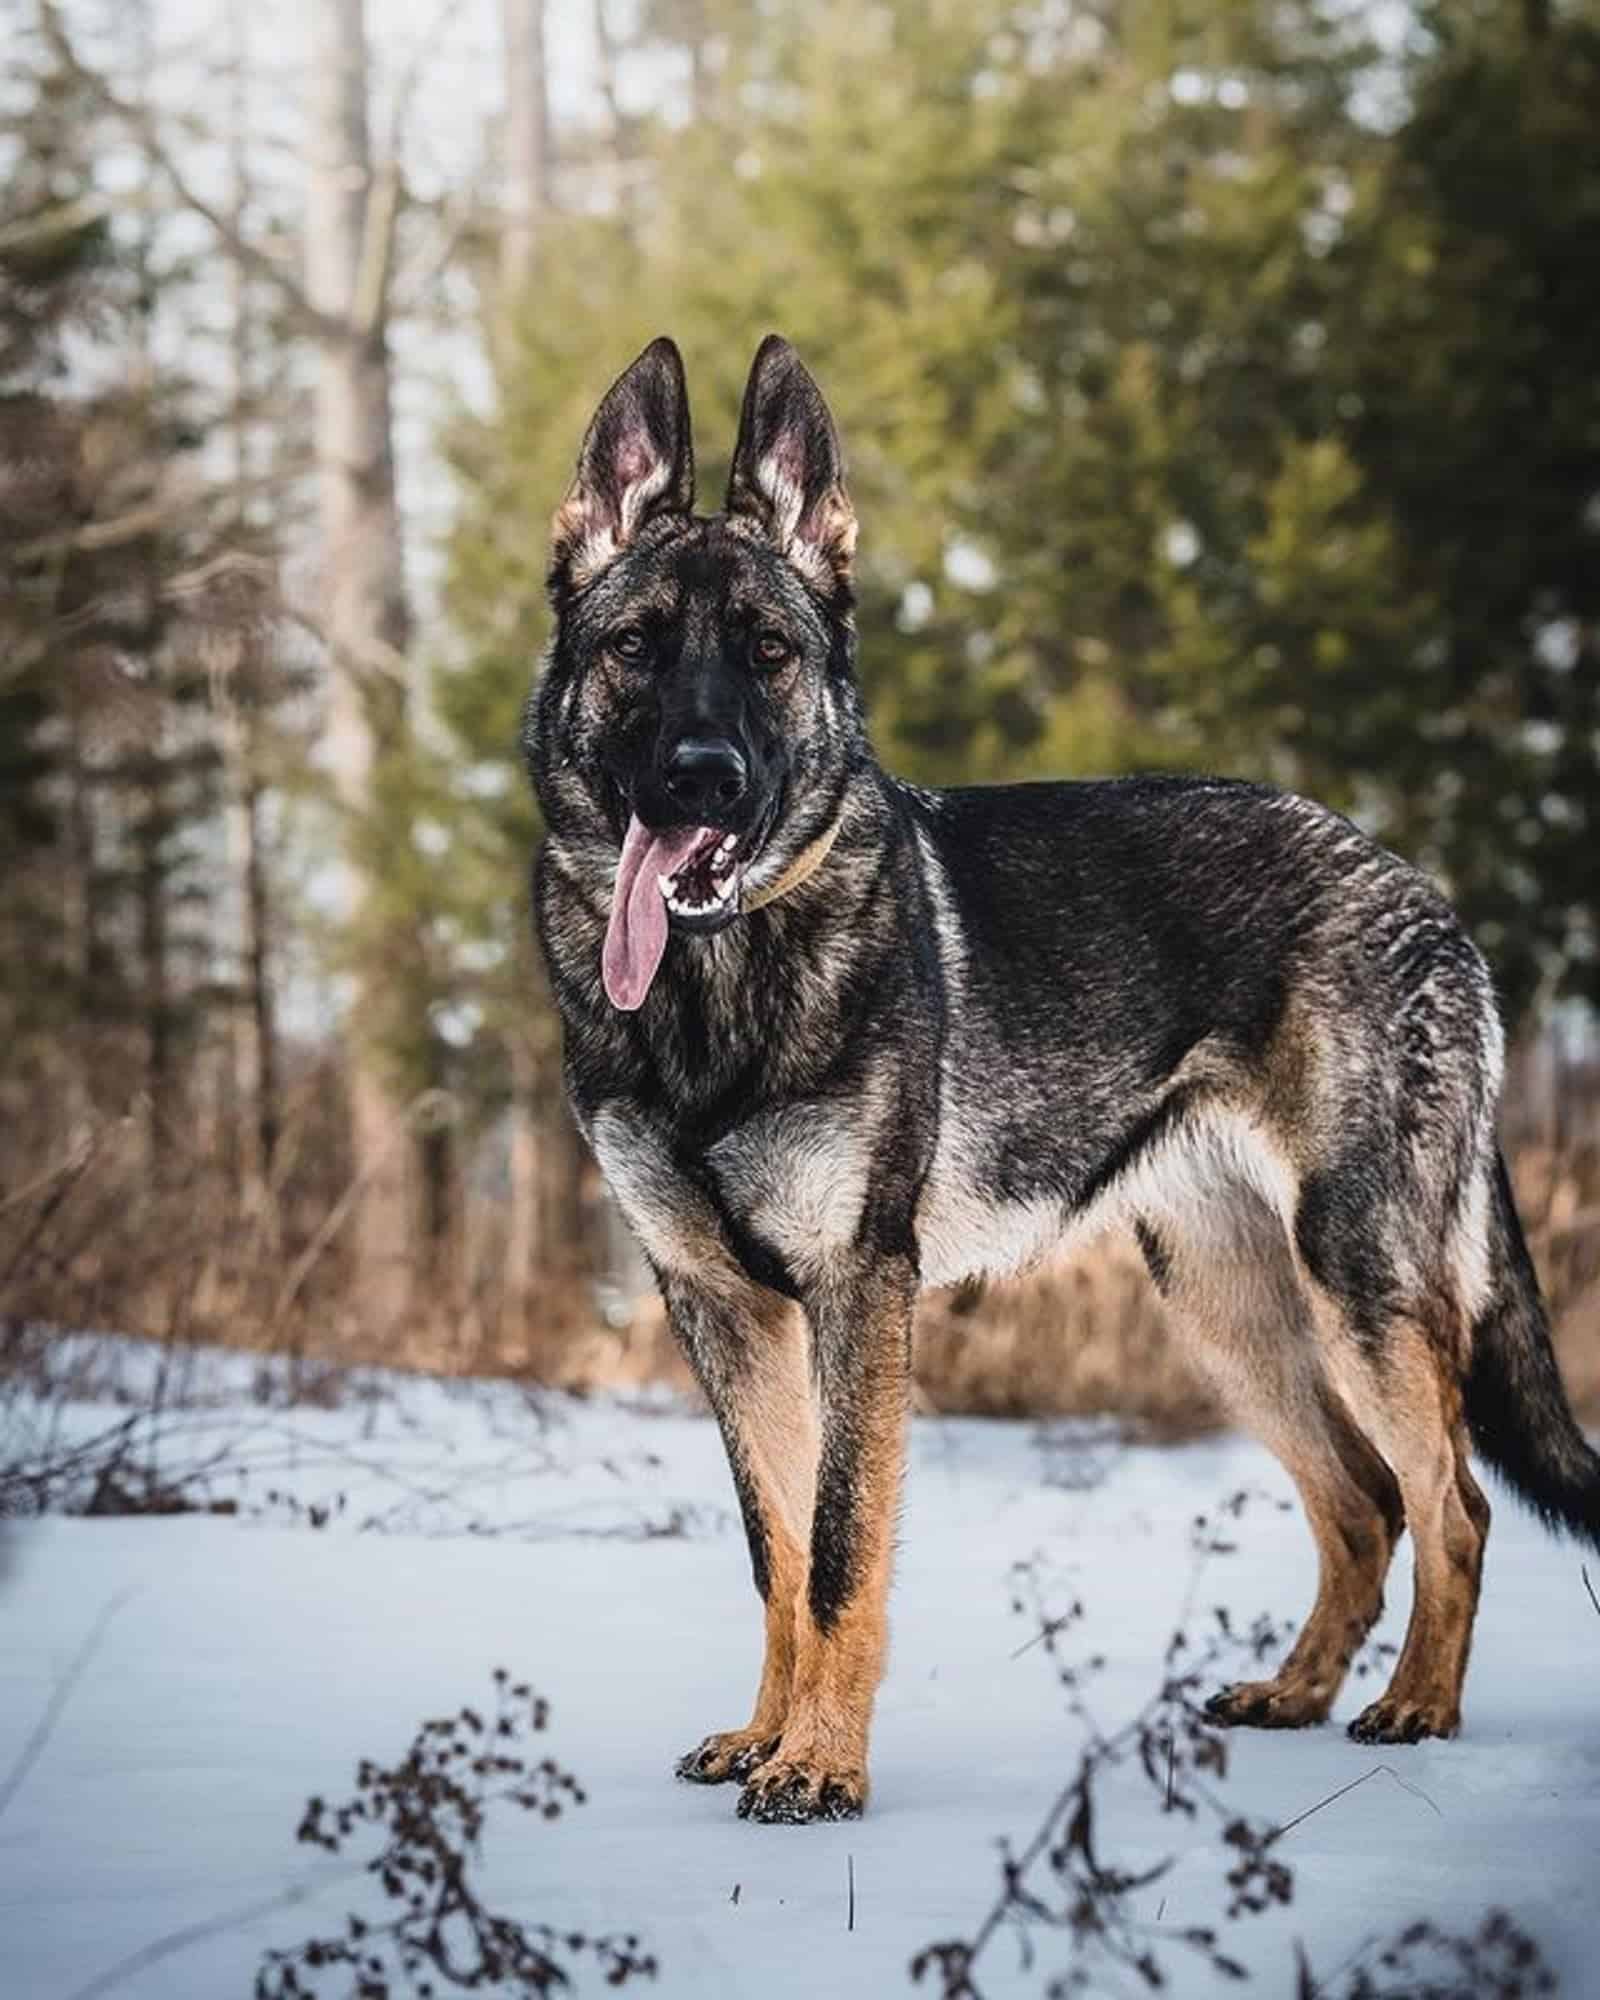 sable german shepherd standing on the snow in nature